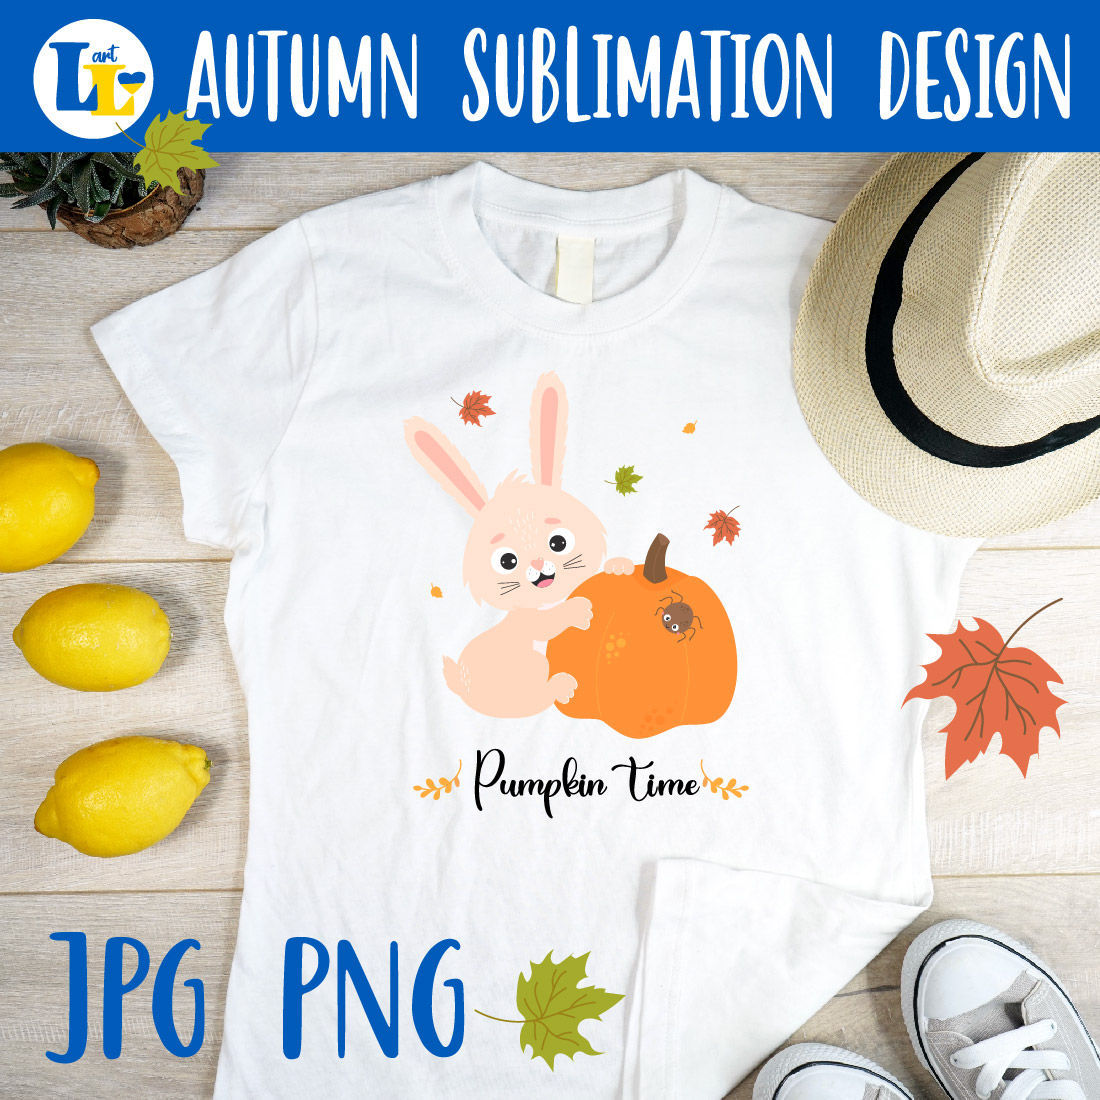 Bunny With Pumpkin Autumn Sublimation Design Cover Image.